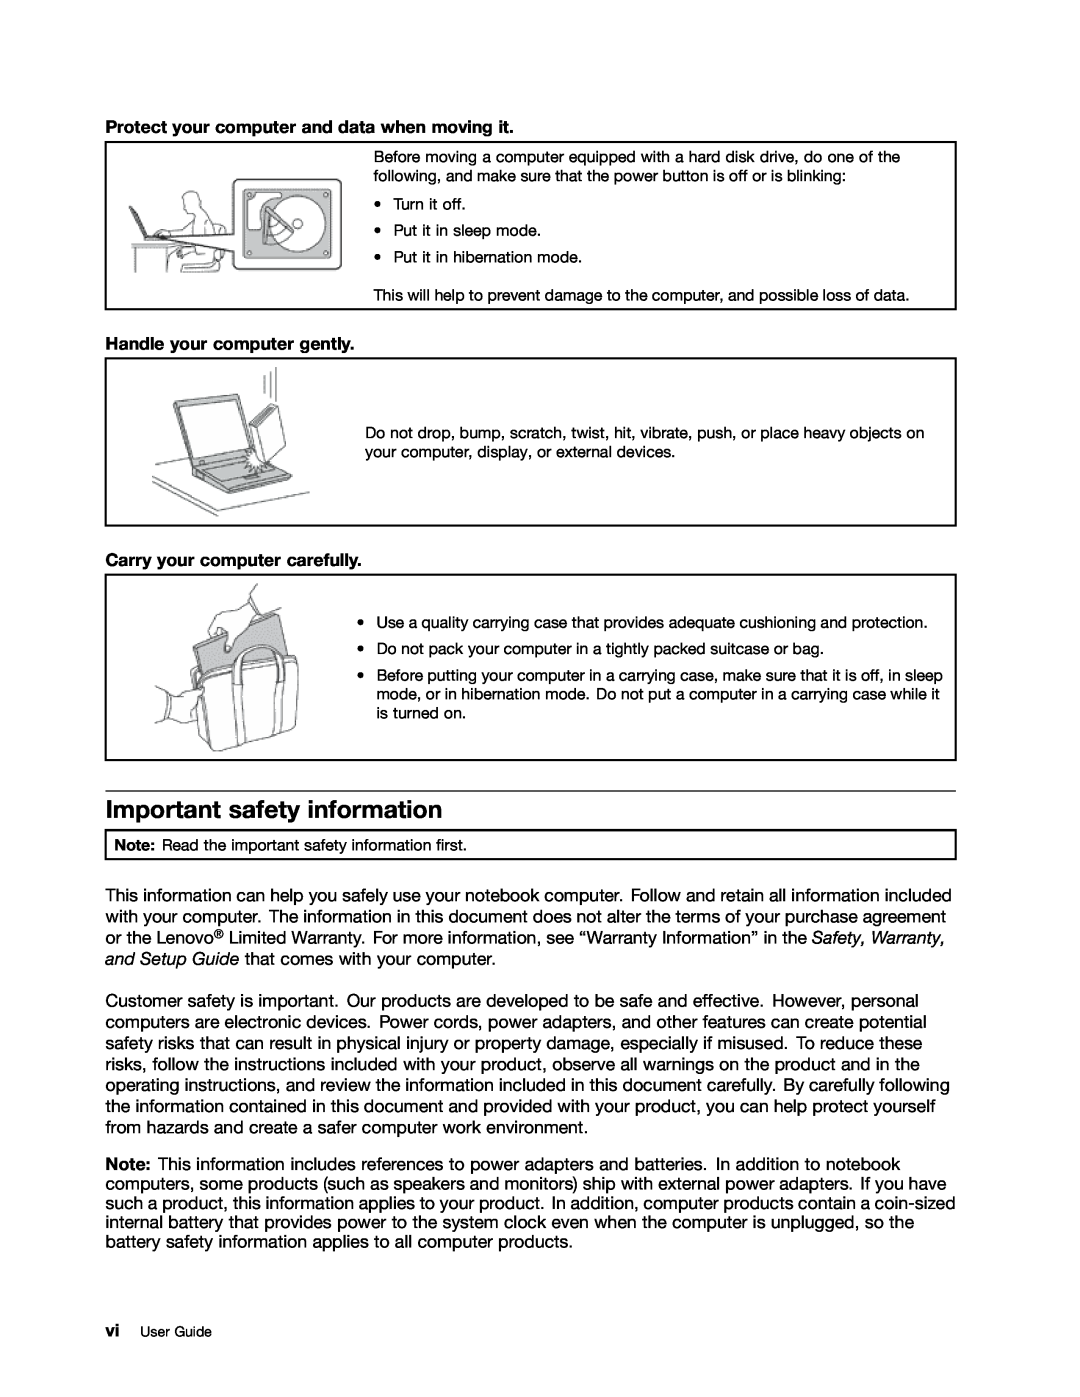 Lenovo 24384KU Important safety information, Protect your computer and data when moving it, Handle your computer gently 